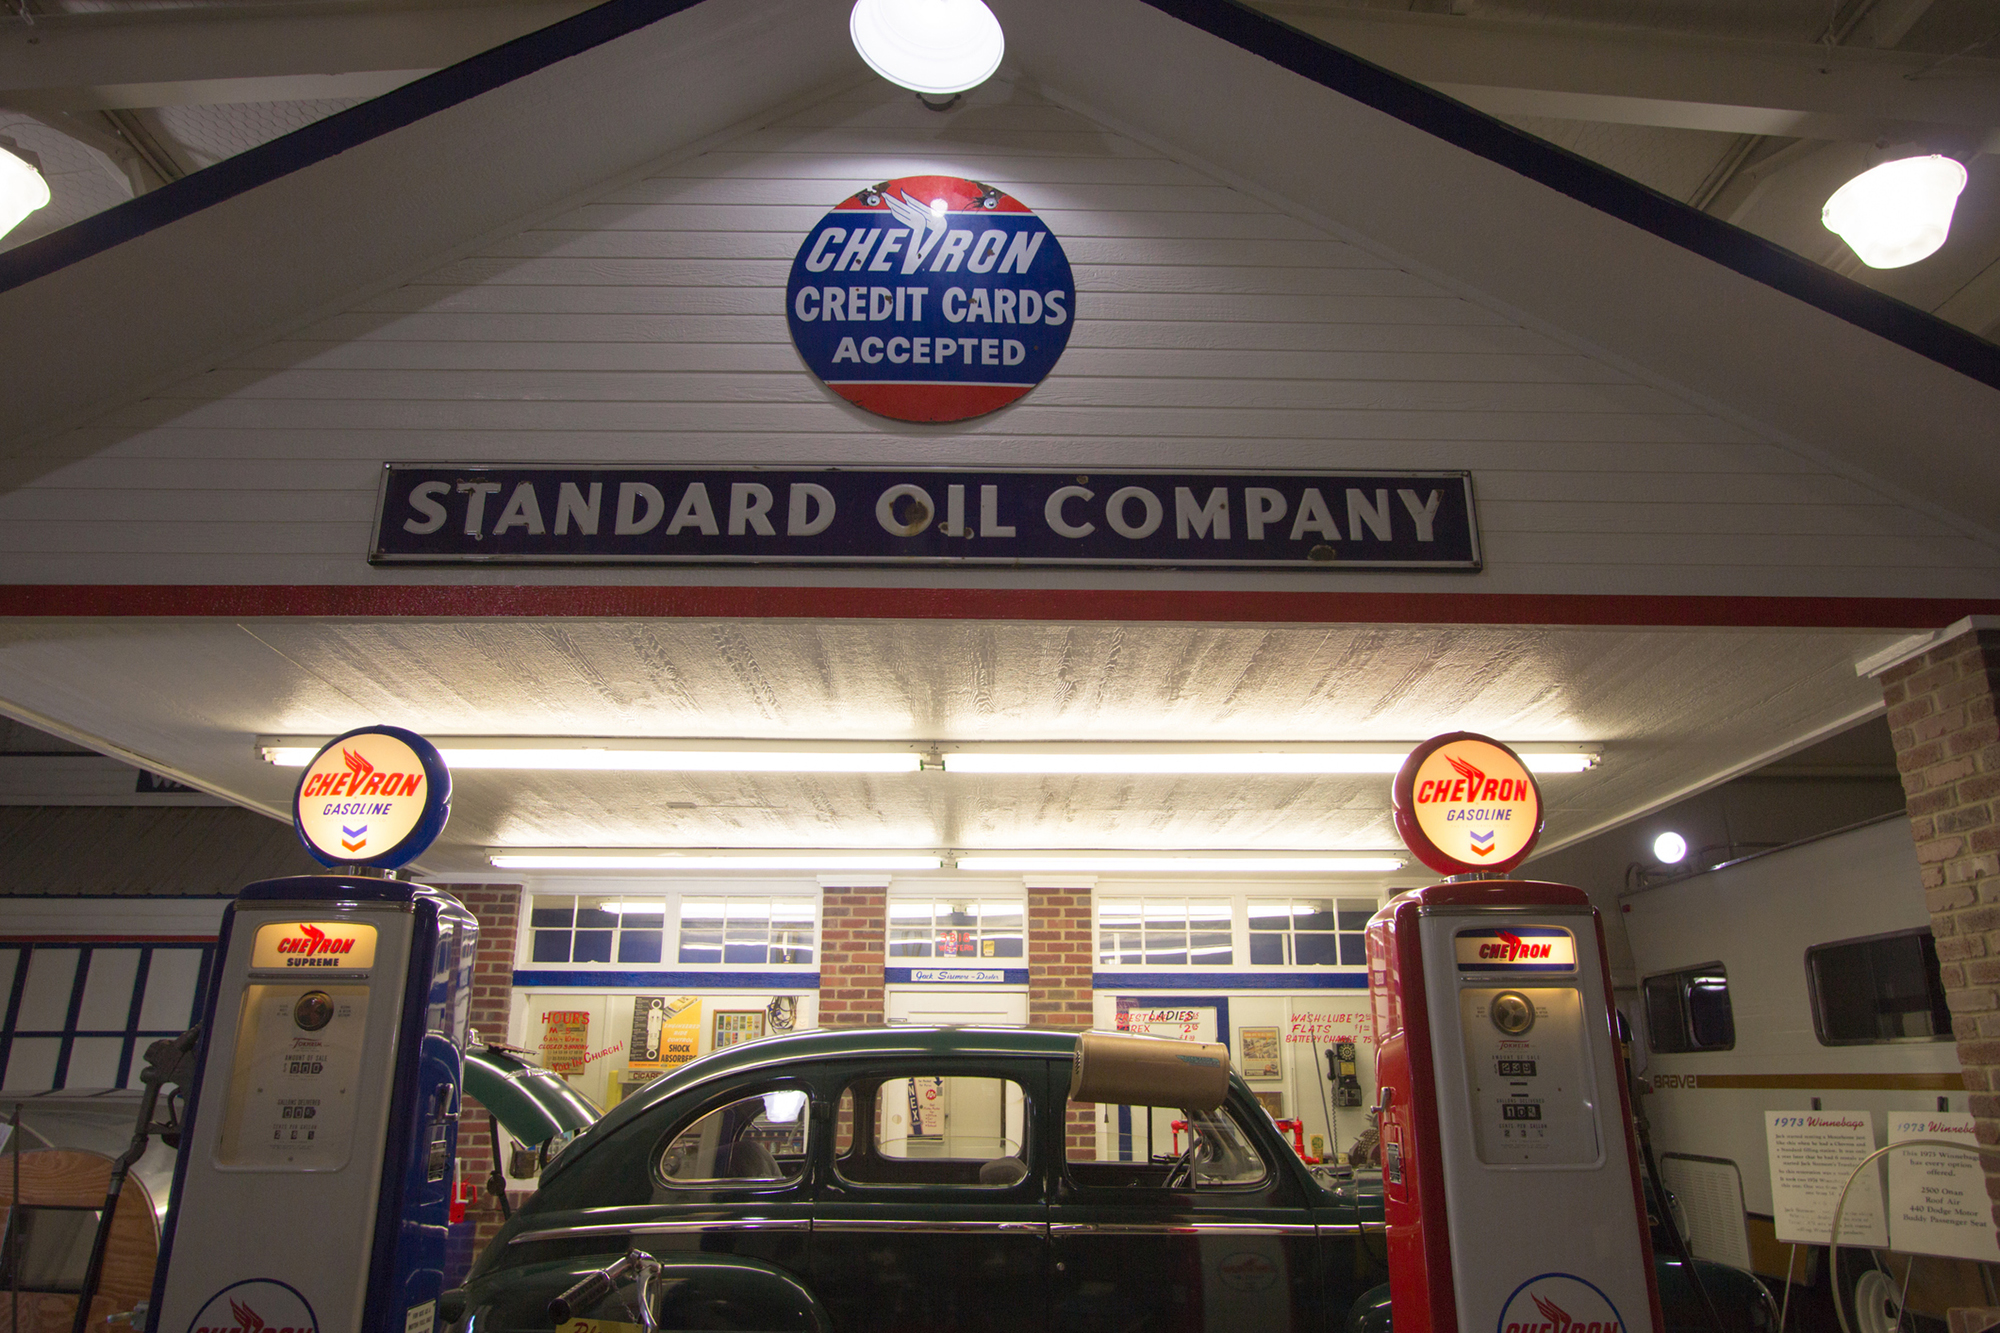 Car parked between pumps at a gas station in the 1970s beneath a sign reading STANDARD OIL COMPANY.